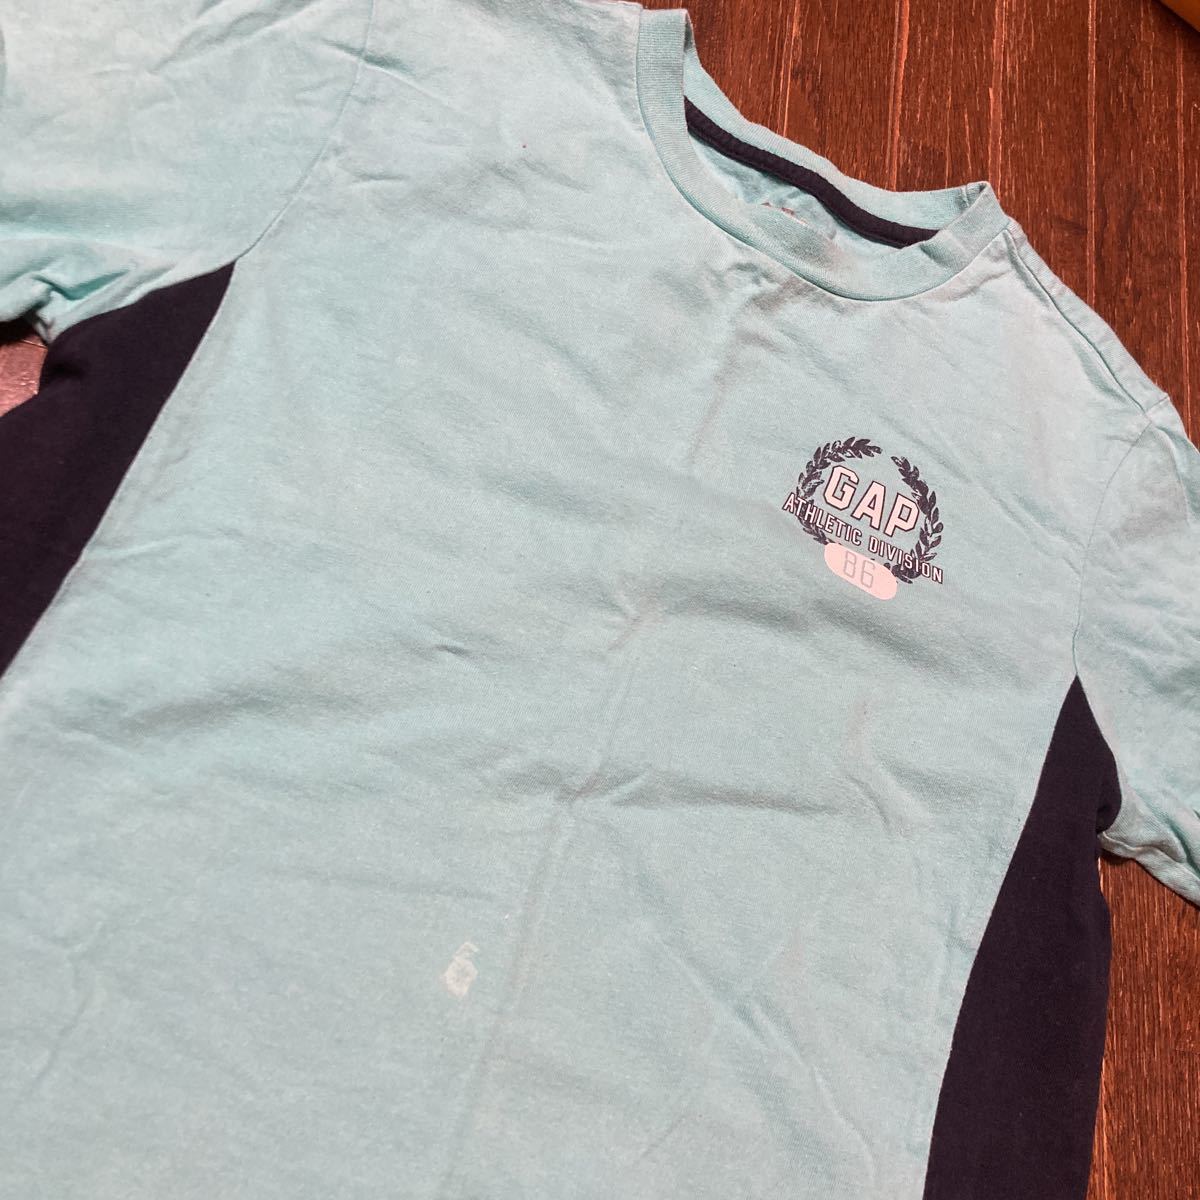 GAP Gap Kids 150 short sleeves T-shirt 2 pieces set turquoise blue . Brown side line one Point 